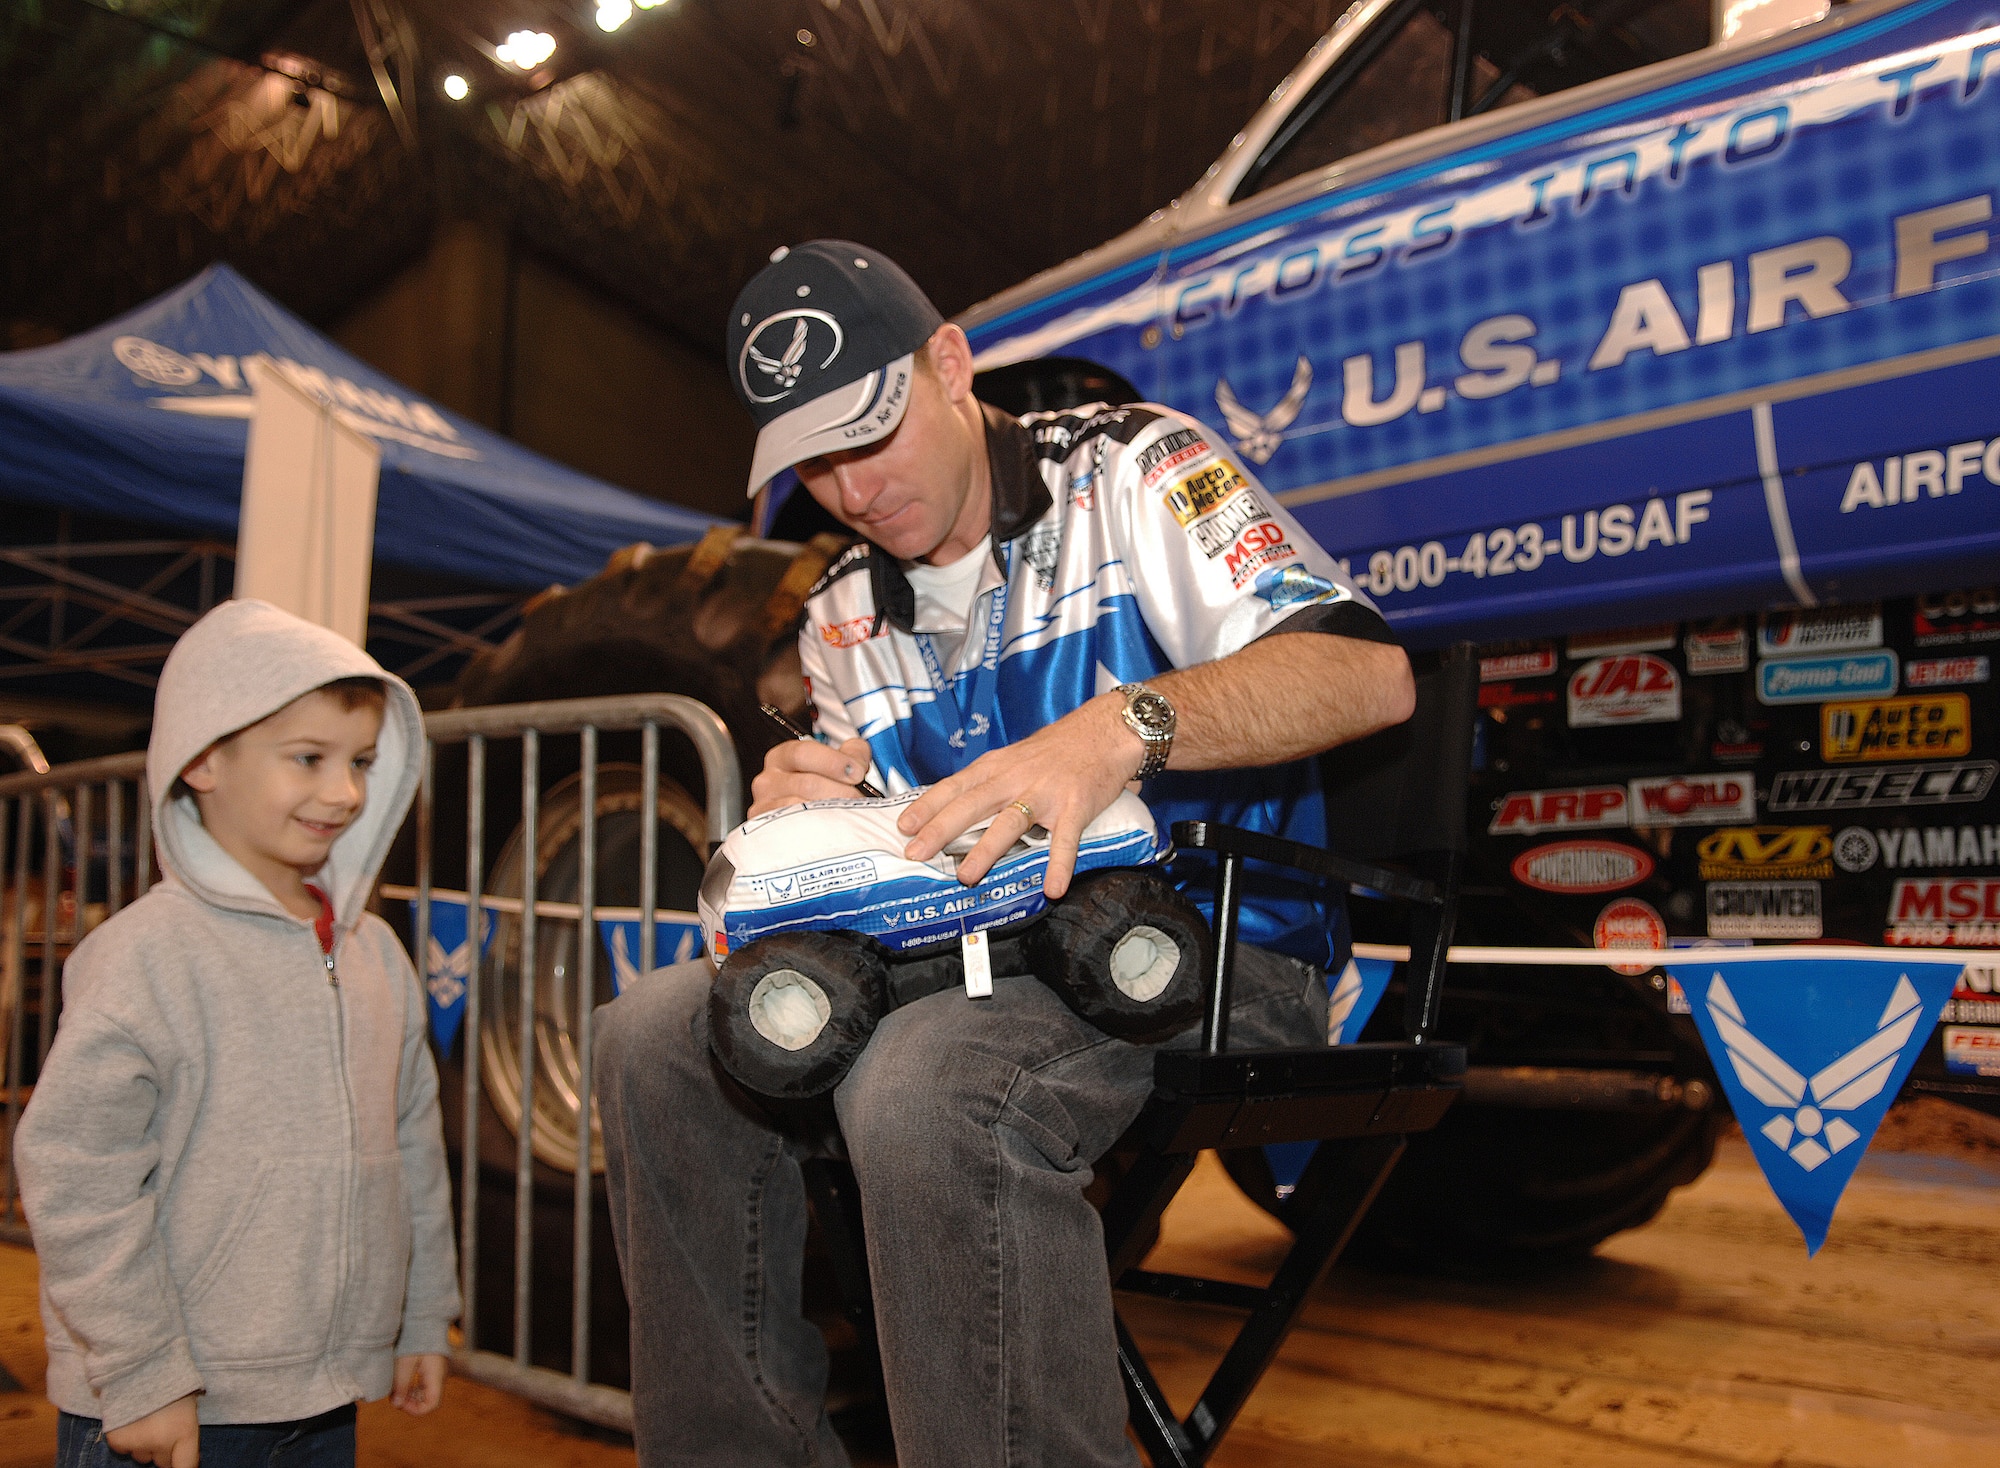 Damon Bradshaw, driver of the Air Force sponsored monster truck Afterburner, autographs a stuffed version of Afterburner for Ethan VanDevender during the Party in the Pits prior to the start of the 2007 Monster Jam in San Antonio, Texas, January 13, 2007. Ethan is the son of Tech. Sgt. Bryce VanDevender, 37th Security Forces Squadron, Lackland AFB, TX. (US Air Force photo/Master Sgt. Scott Reed)